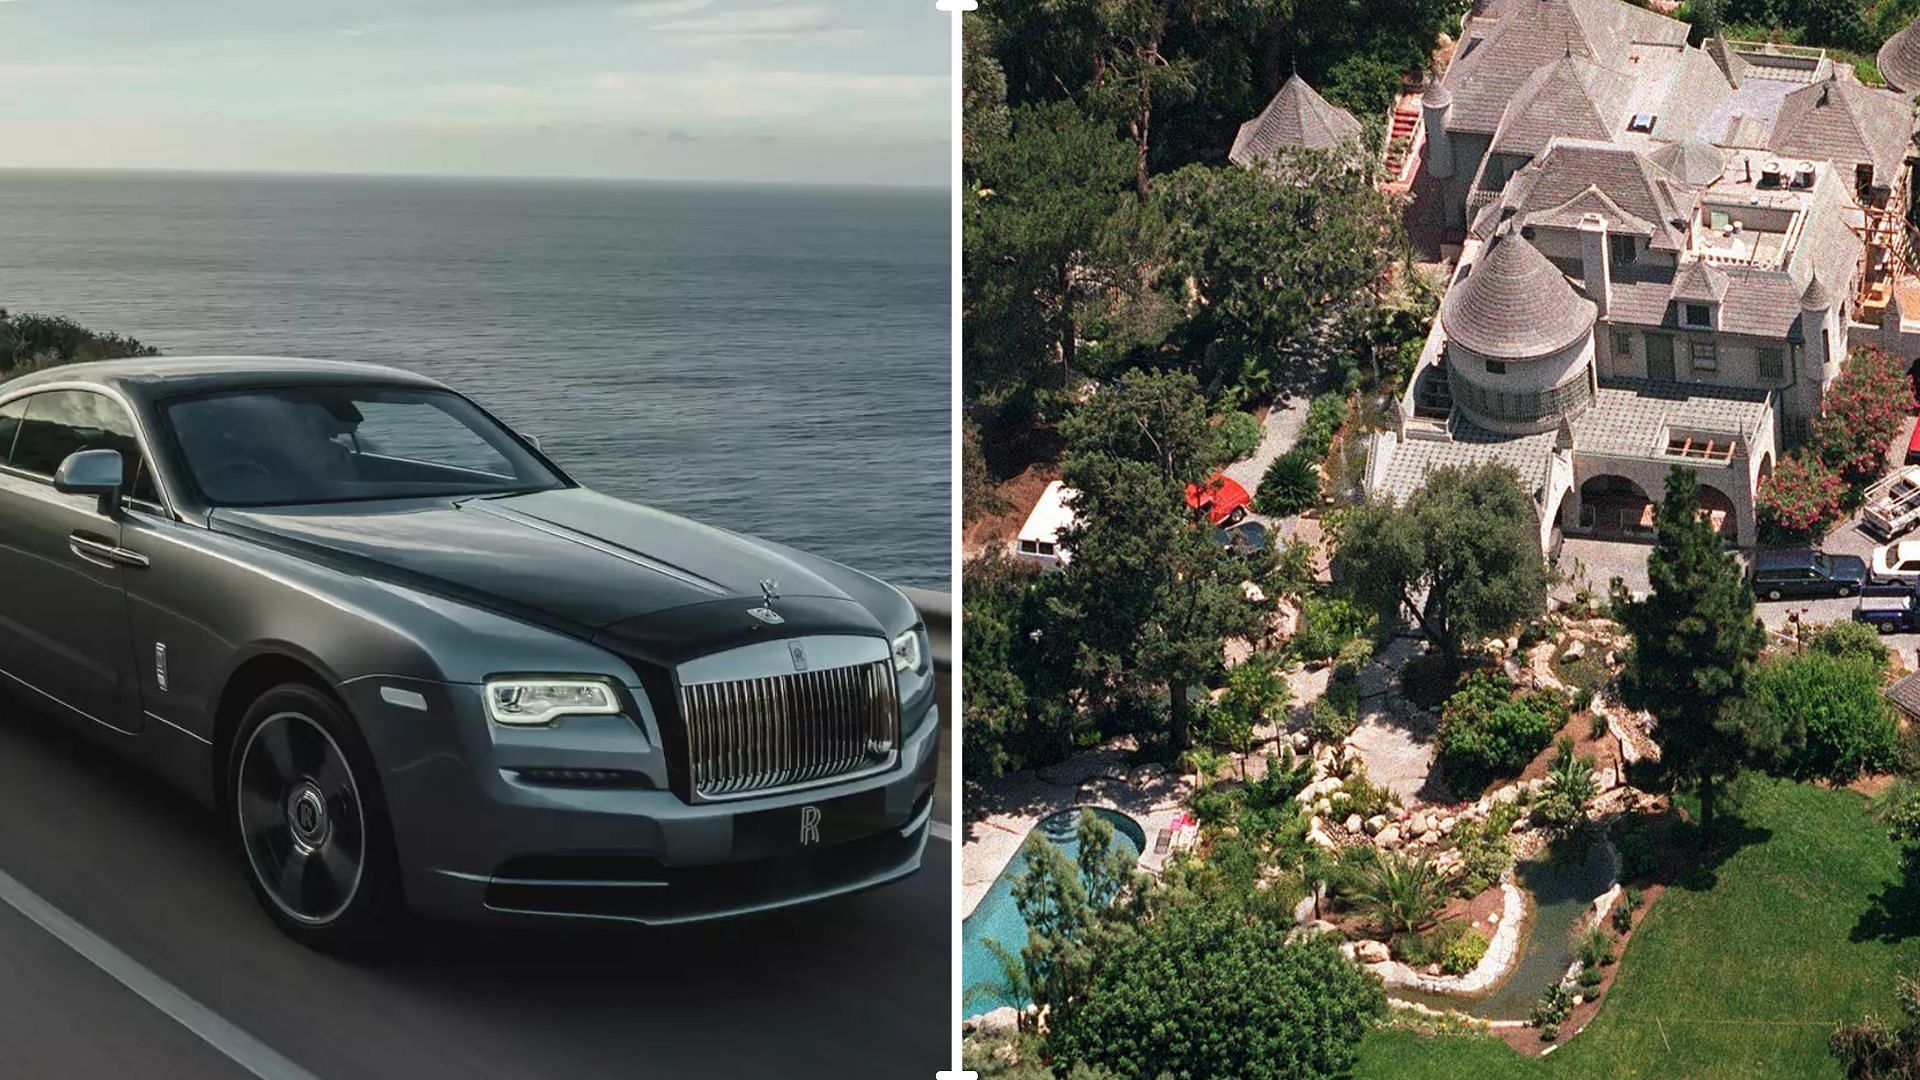 A Rolls Royce and a massive mansion on Hollywood Hill are some of the most expensive things owned by Johnny Depp (Images via Rolls Royce/Getty)